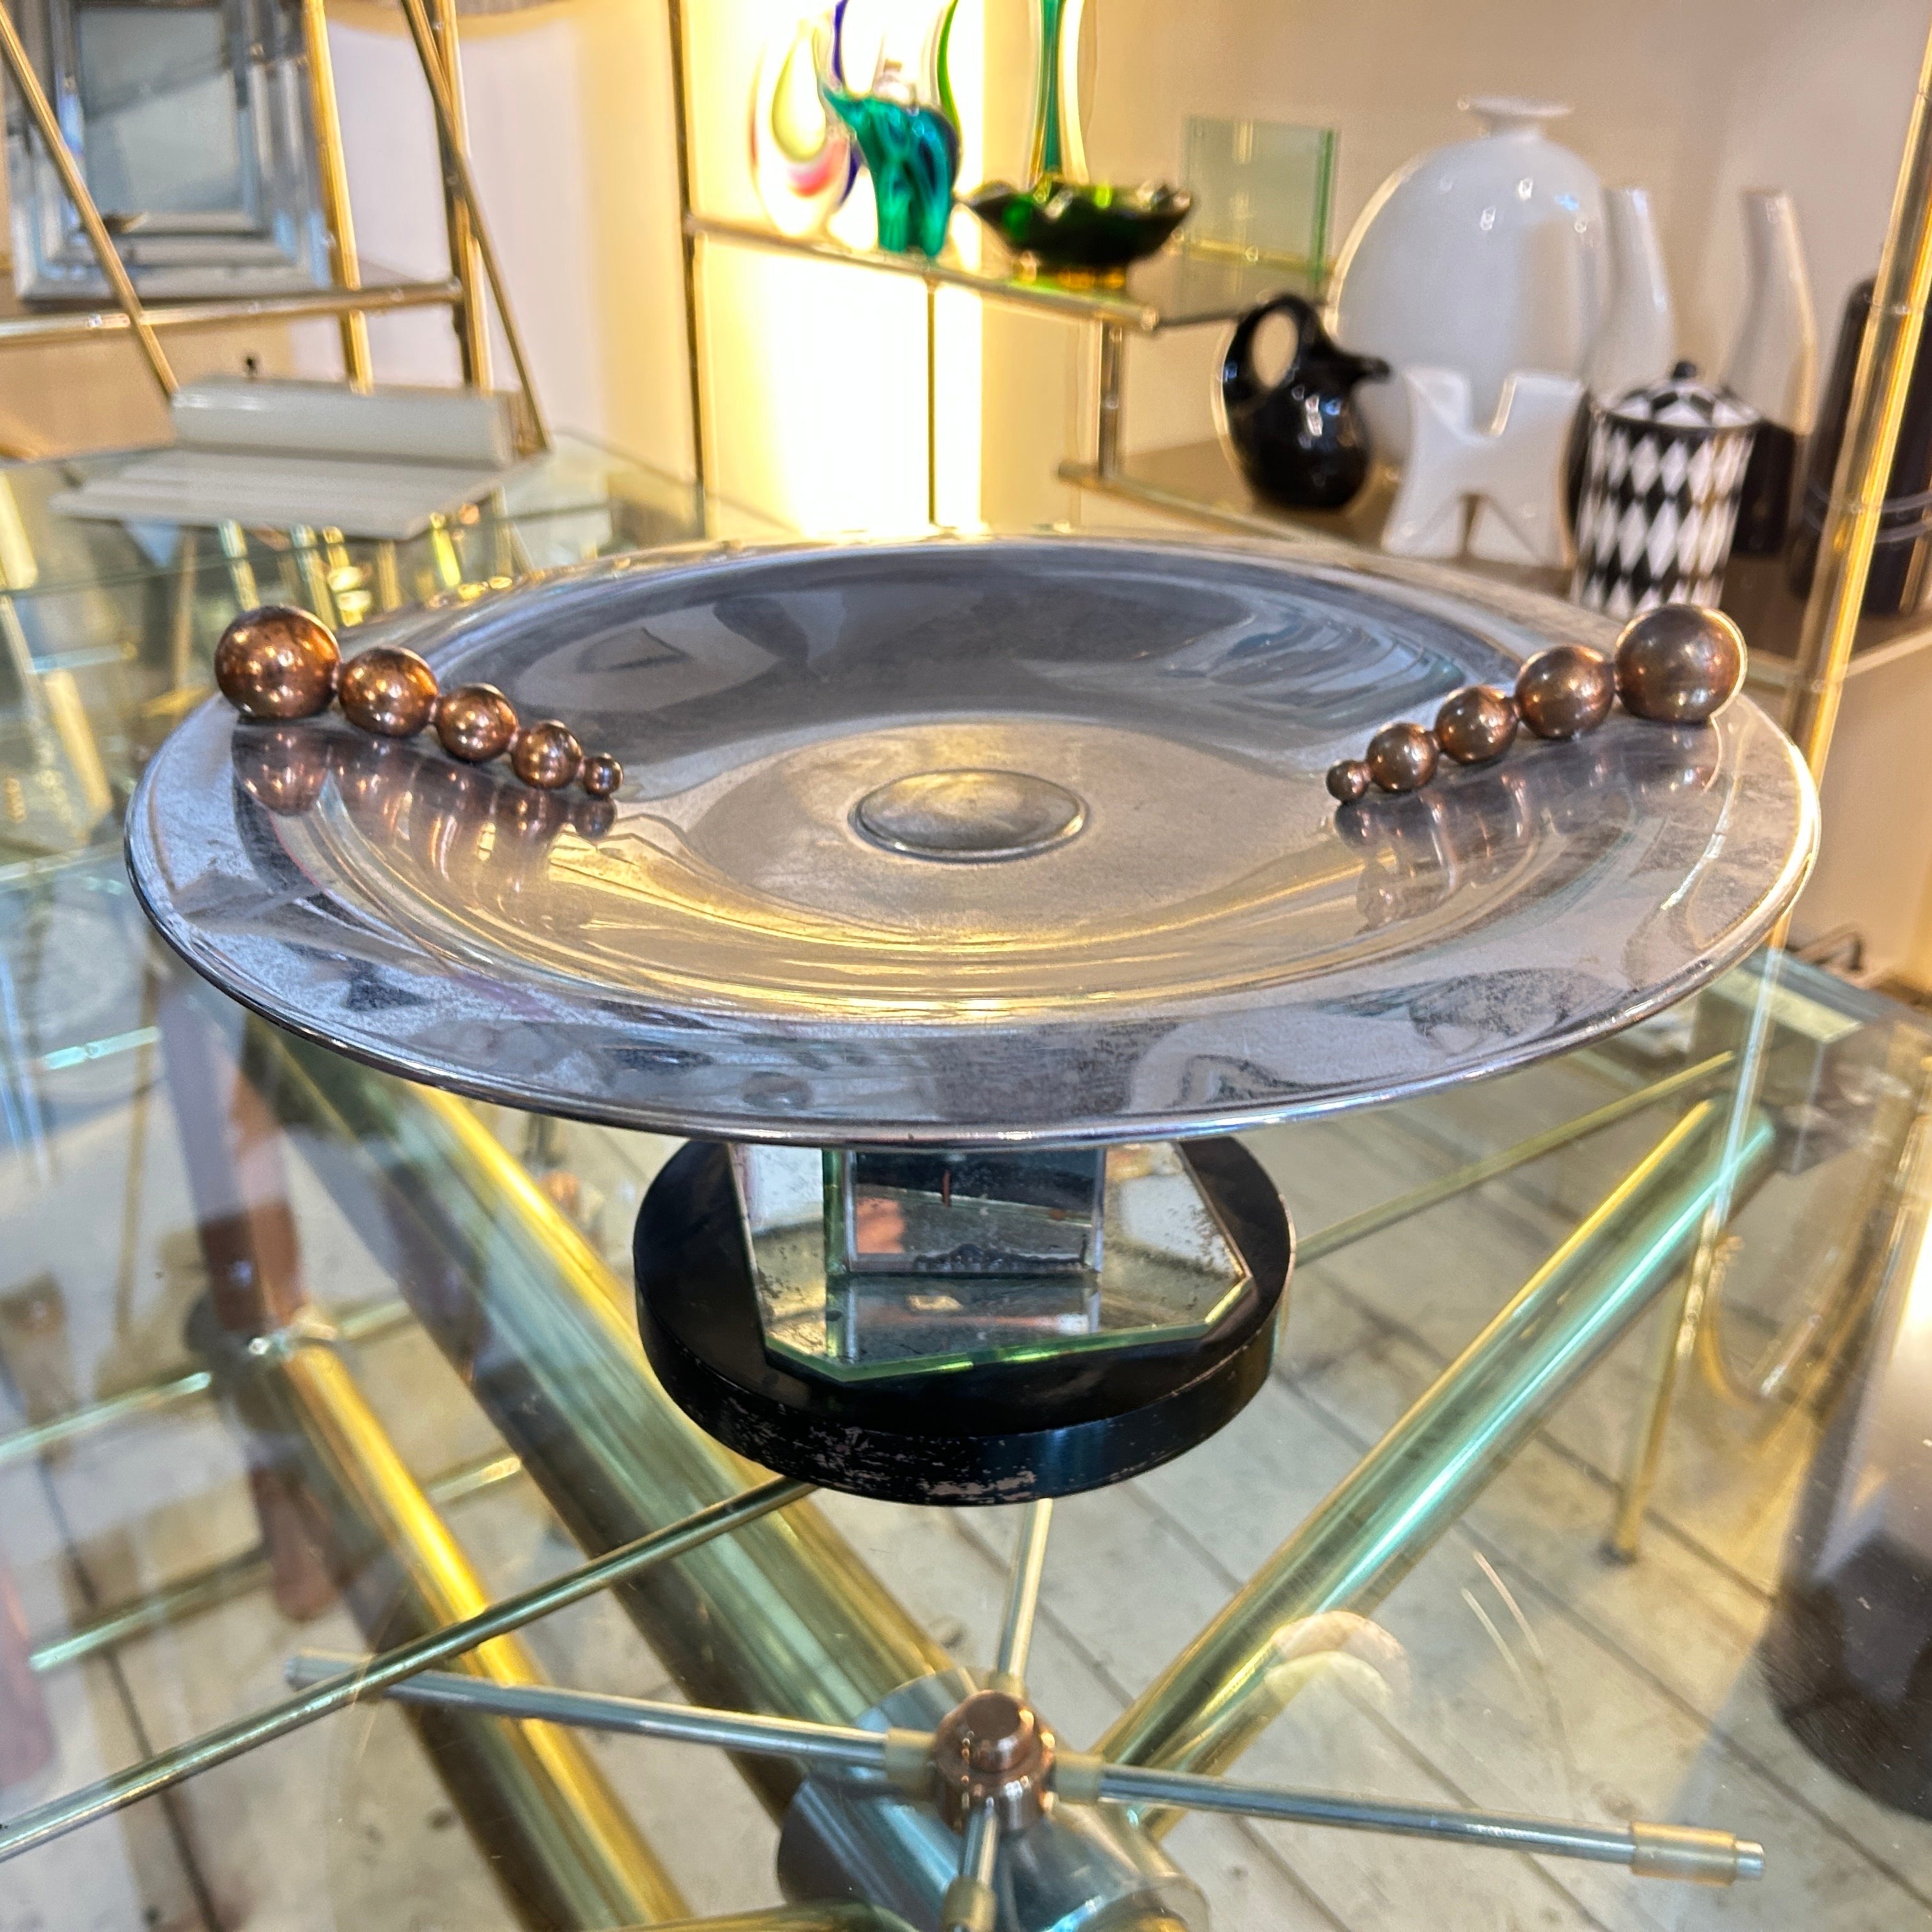 The 1930s Art Deco mirror glass and chromed metal italian round centerpiece stand is a vintage decorative piece that was likely designed in Italy during the Art Deco era of the 1930s. It features a round metal surface supported by a wood and mirror